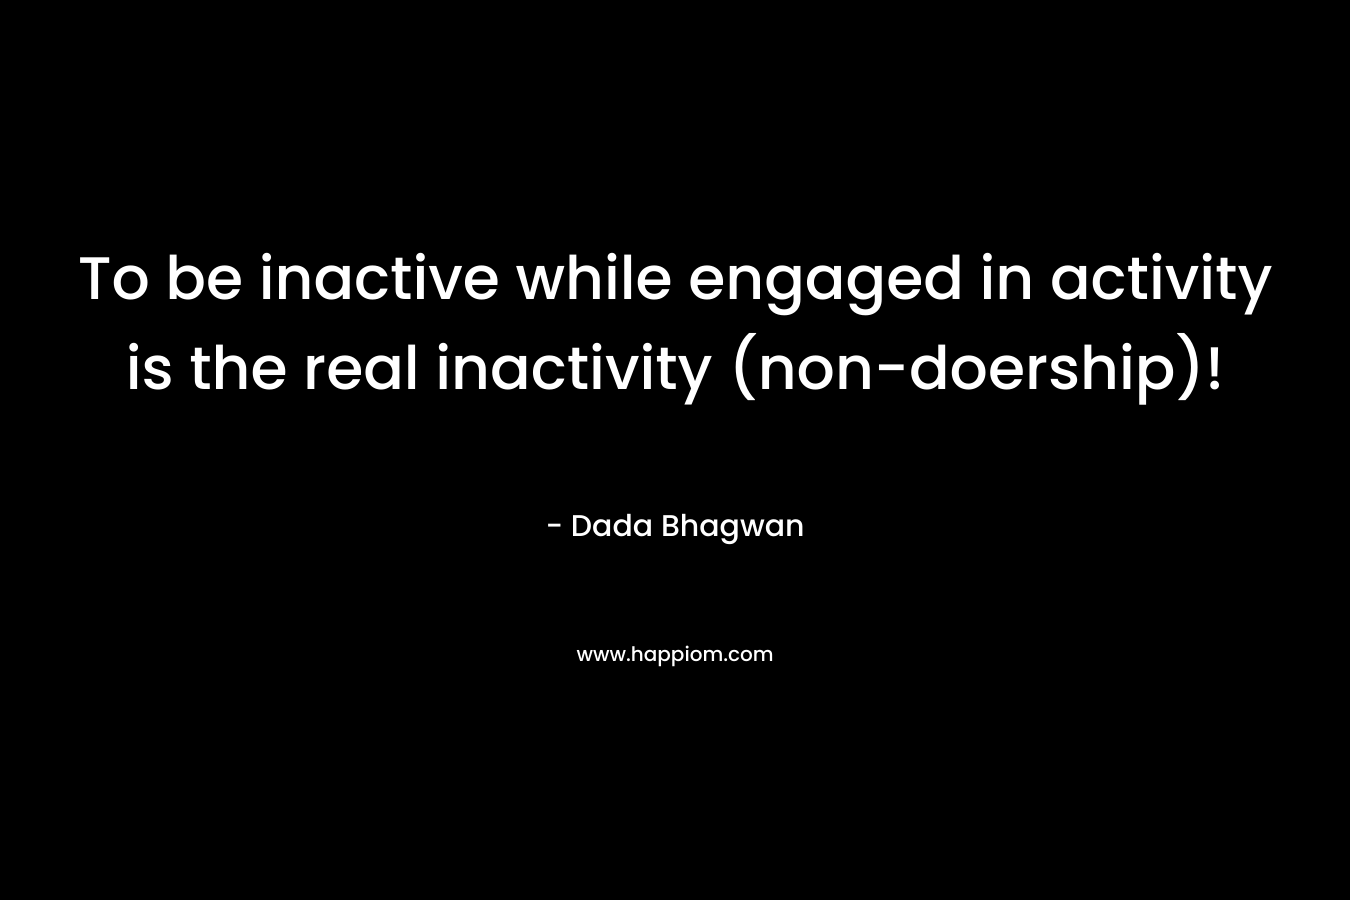 To be inactive while engaged in activity is the real inactivity (non-doership)!